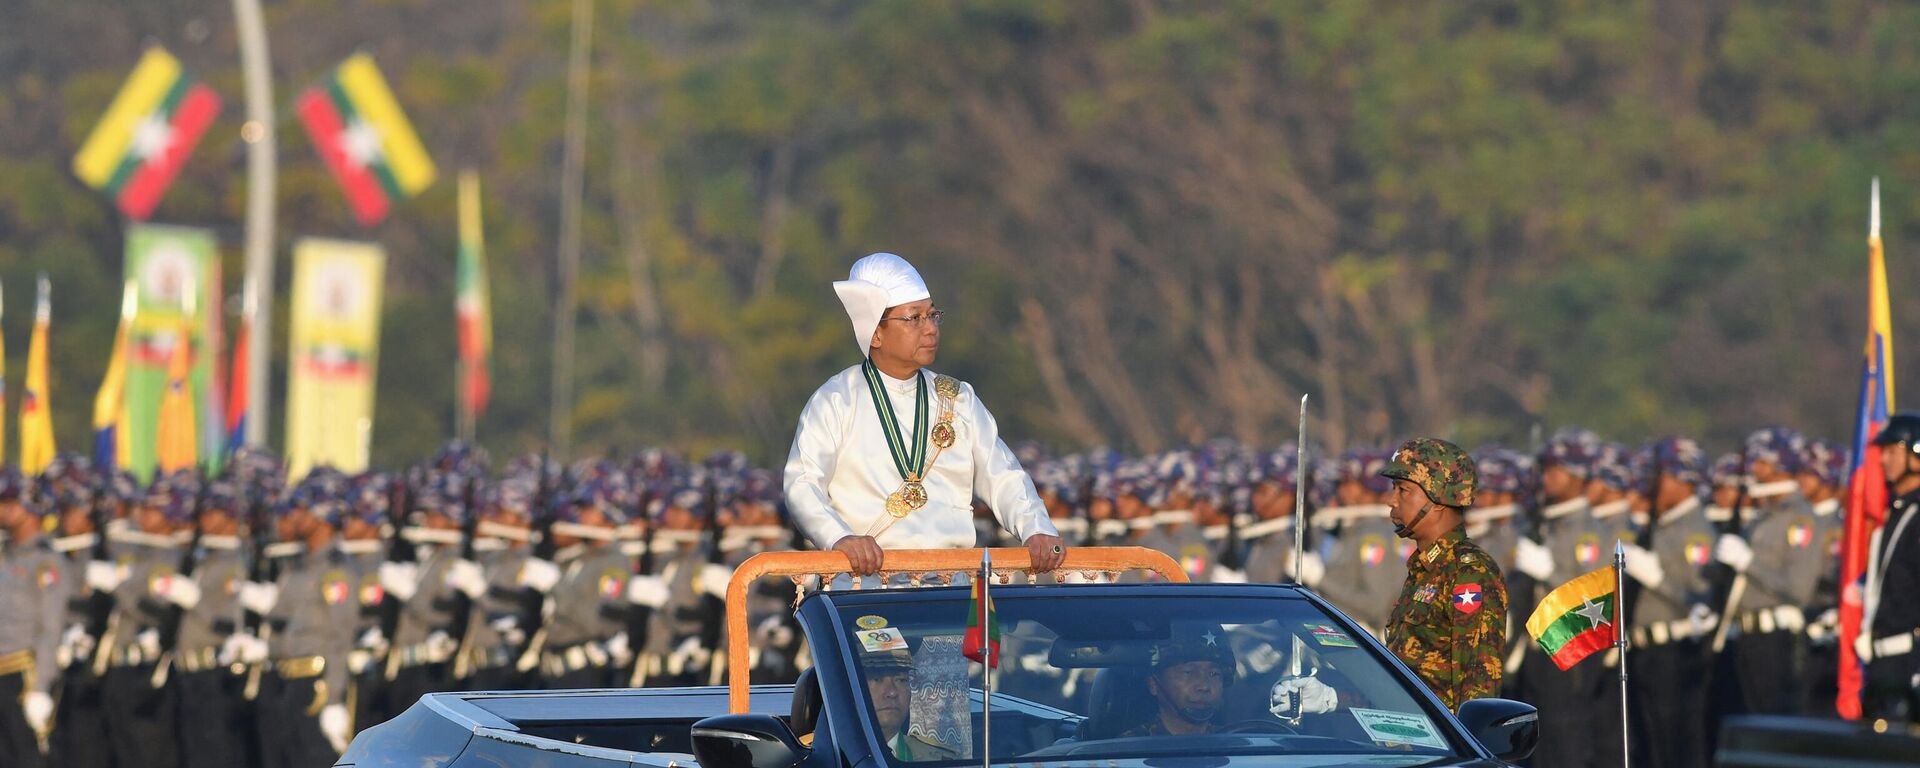 Myanmar's military chief Min Aung Hlaing stands in a car as he oversees a military display at a parade ground to mark the country's Independence Day in Naypyidaw on January 4, 2023 - Sputnik India, 1920, 04.01.2023